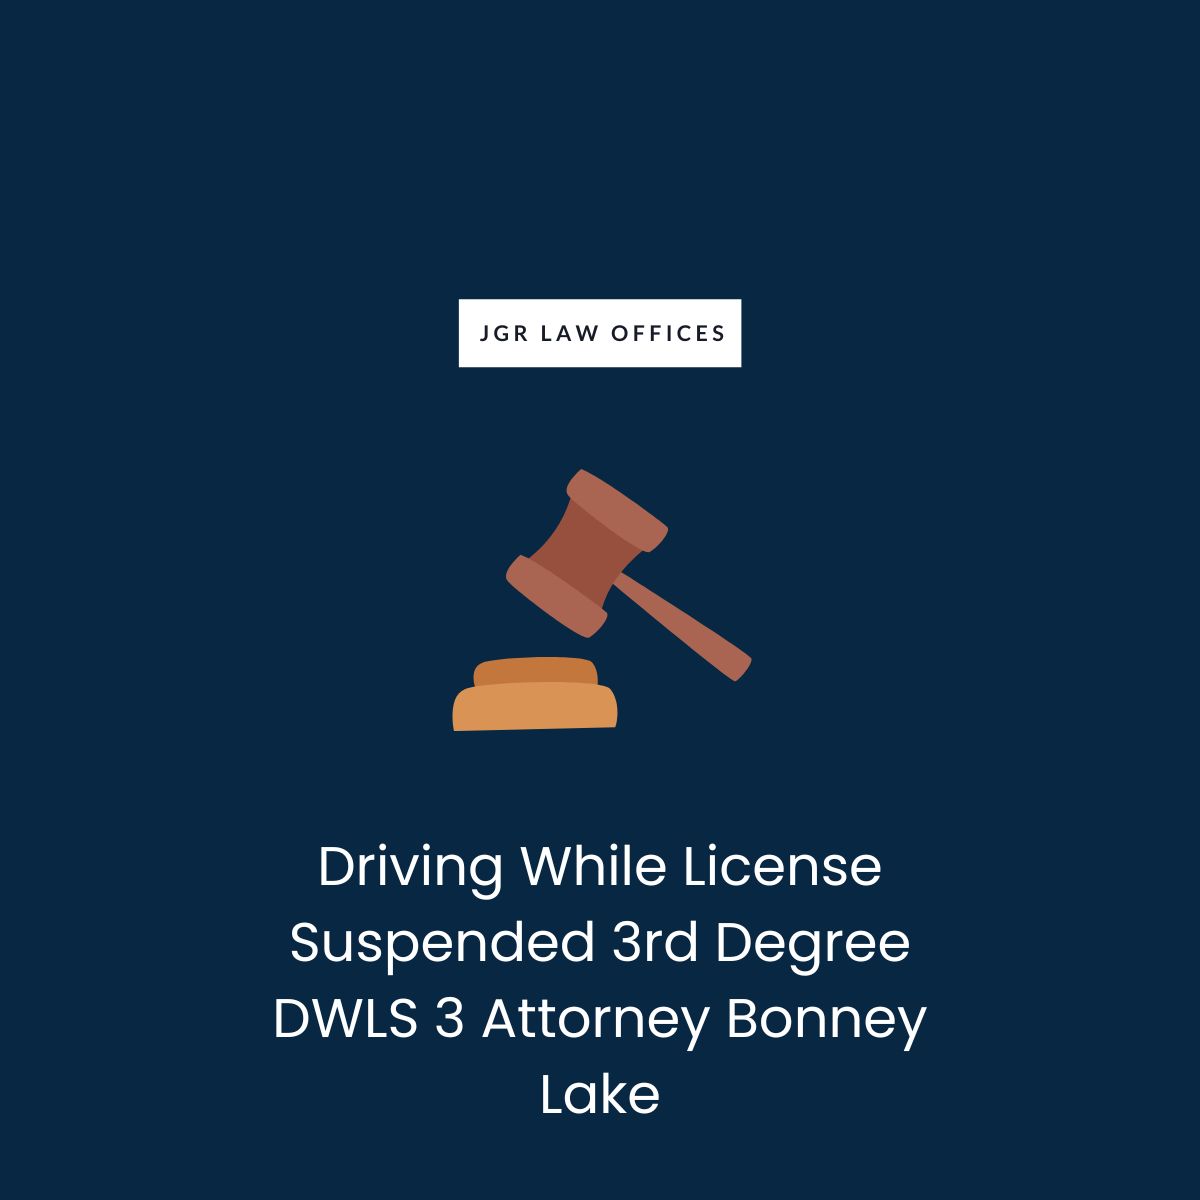 Driving While License Suspended 3rd Degree DWLS 3 Attorney Bonney Lake